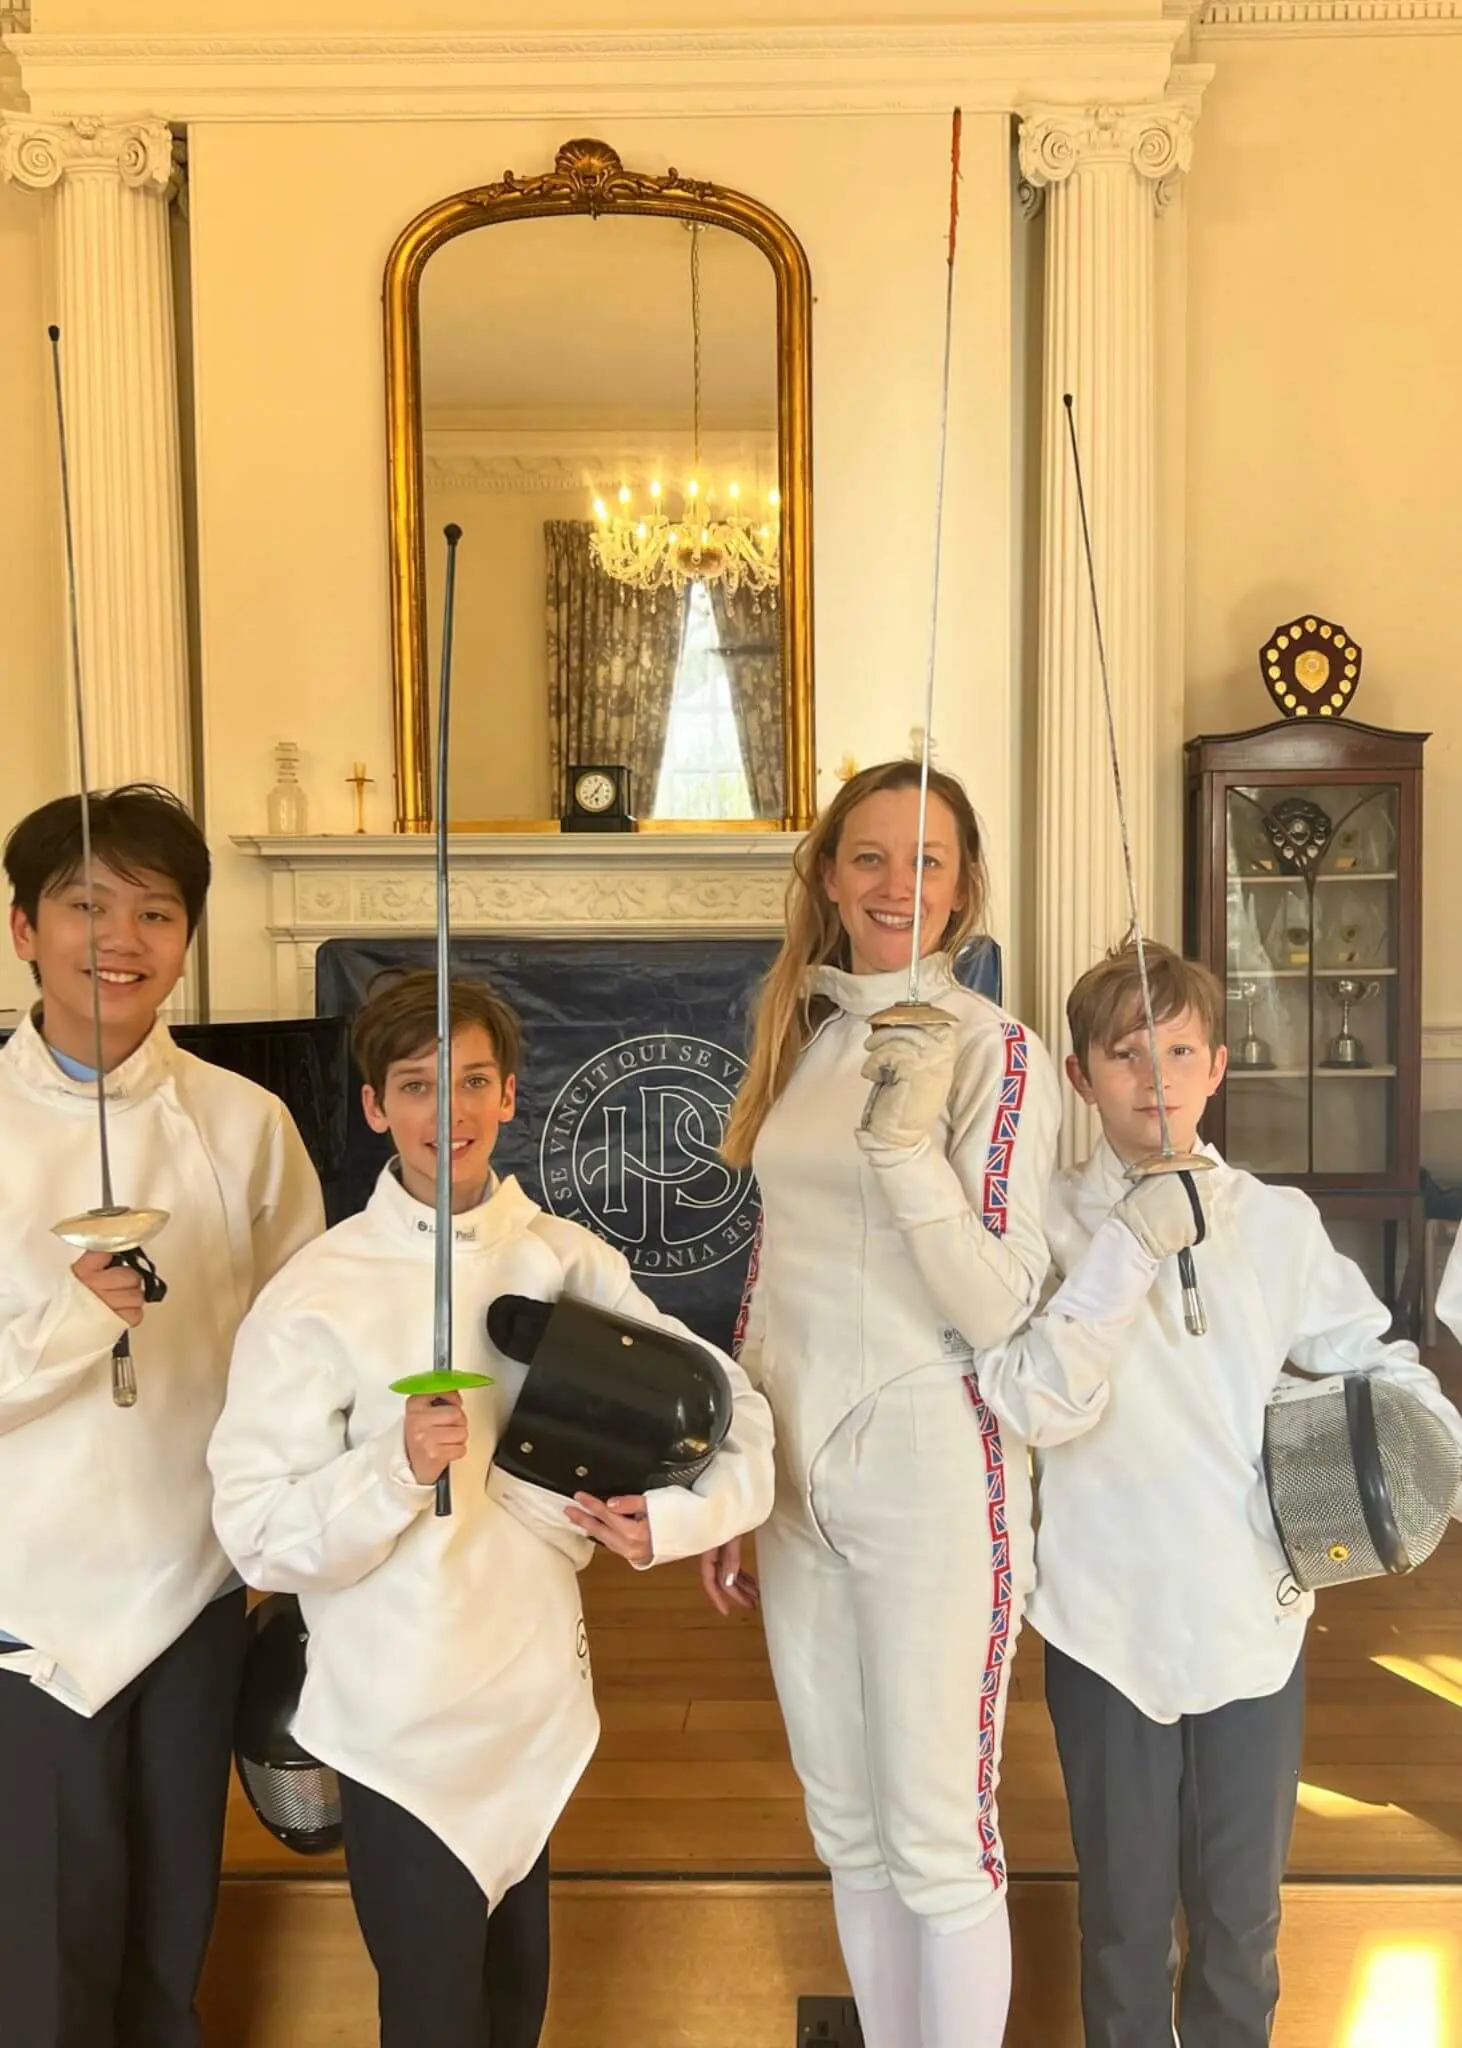 Olympic fencer, Commonwealth fencing champion and children’s author, Eloise Smith ran a fantastic fencing session with some of our lucky Senior fencers, sharing her top tips and techniques.